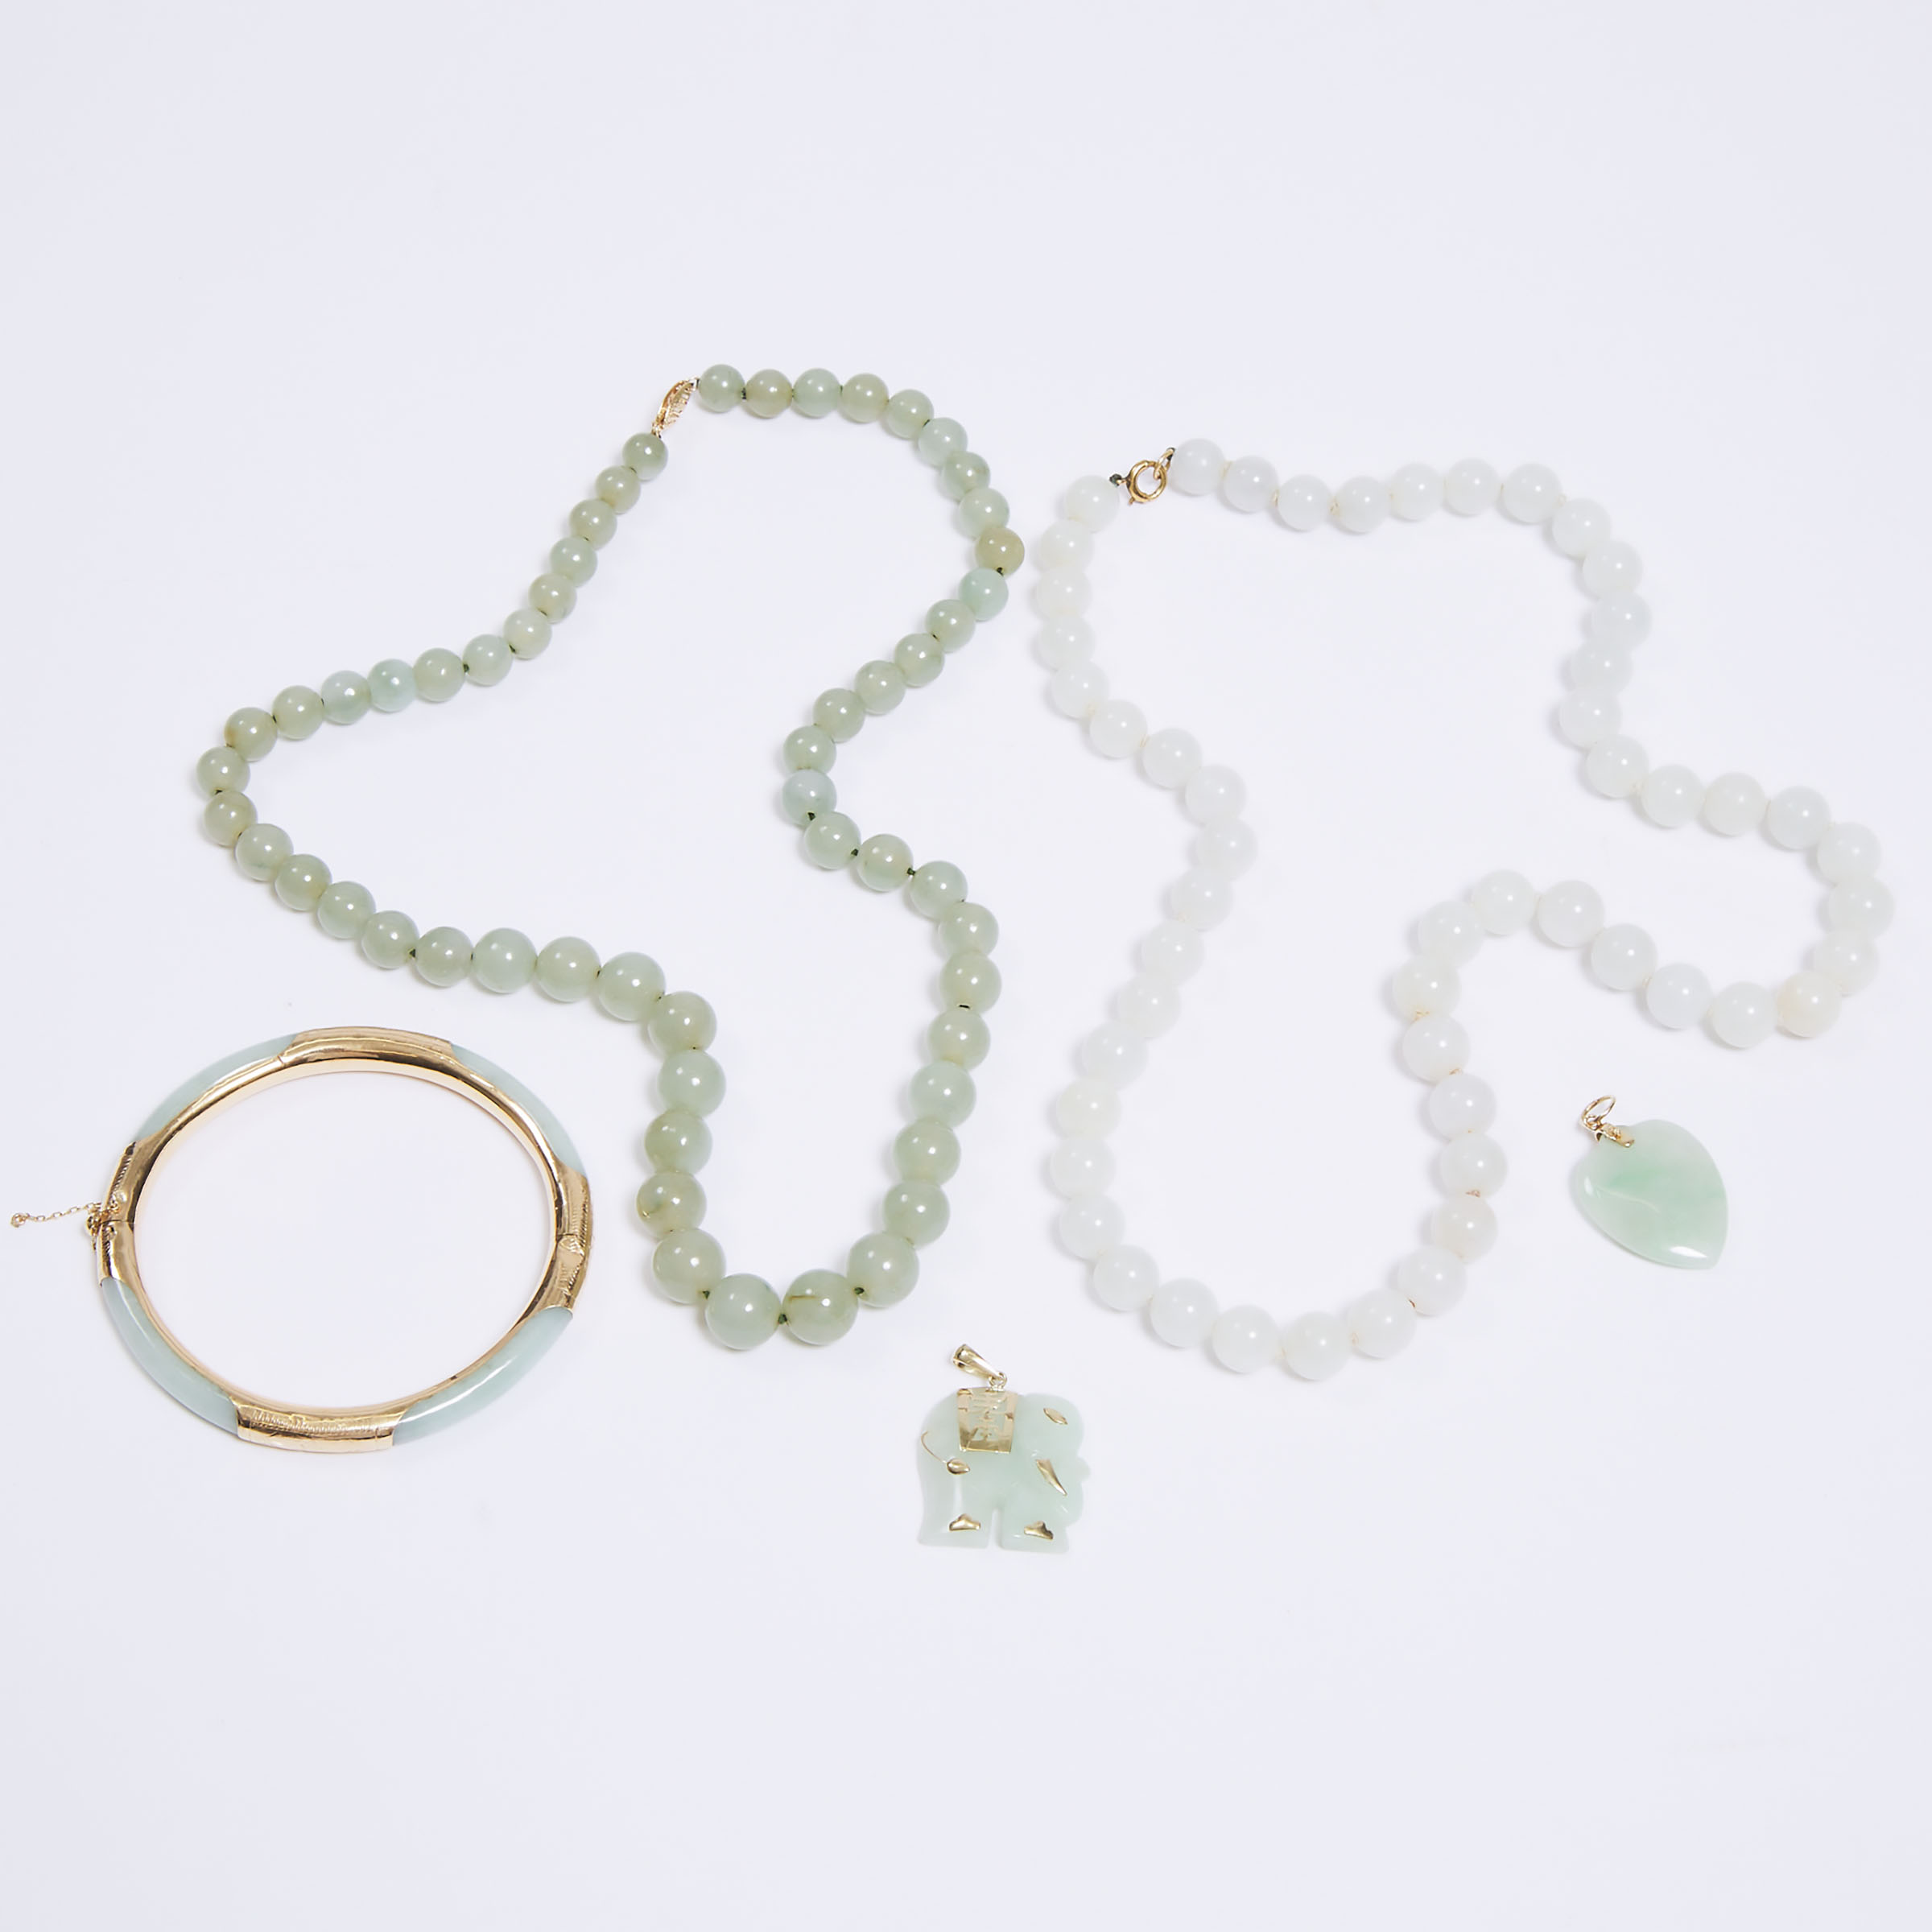 A Group of Five Chinese Gold Mounted Jadeite Jewellery Pieces, 金镶翡翠首饰一组五件, longest necklace length 1